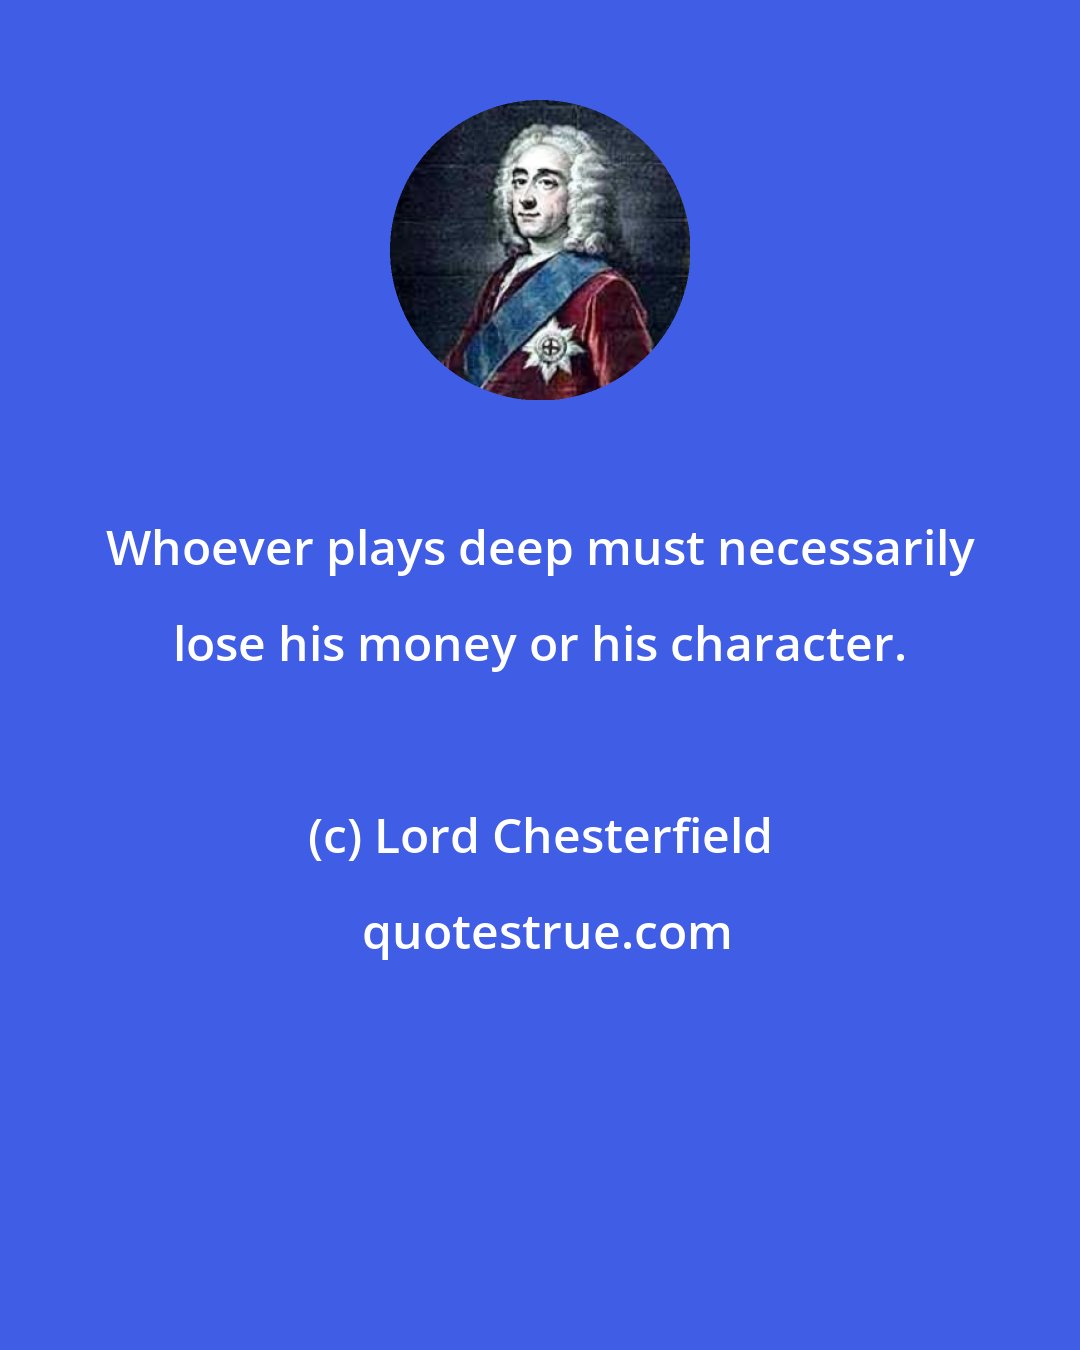 Lord Chesterfield: Whoever plays deep must necessarily lose his money or his character.